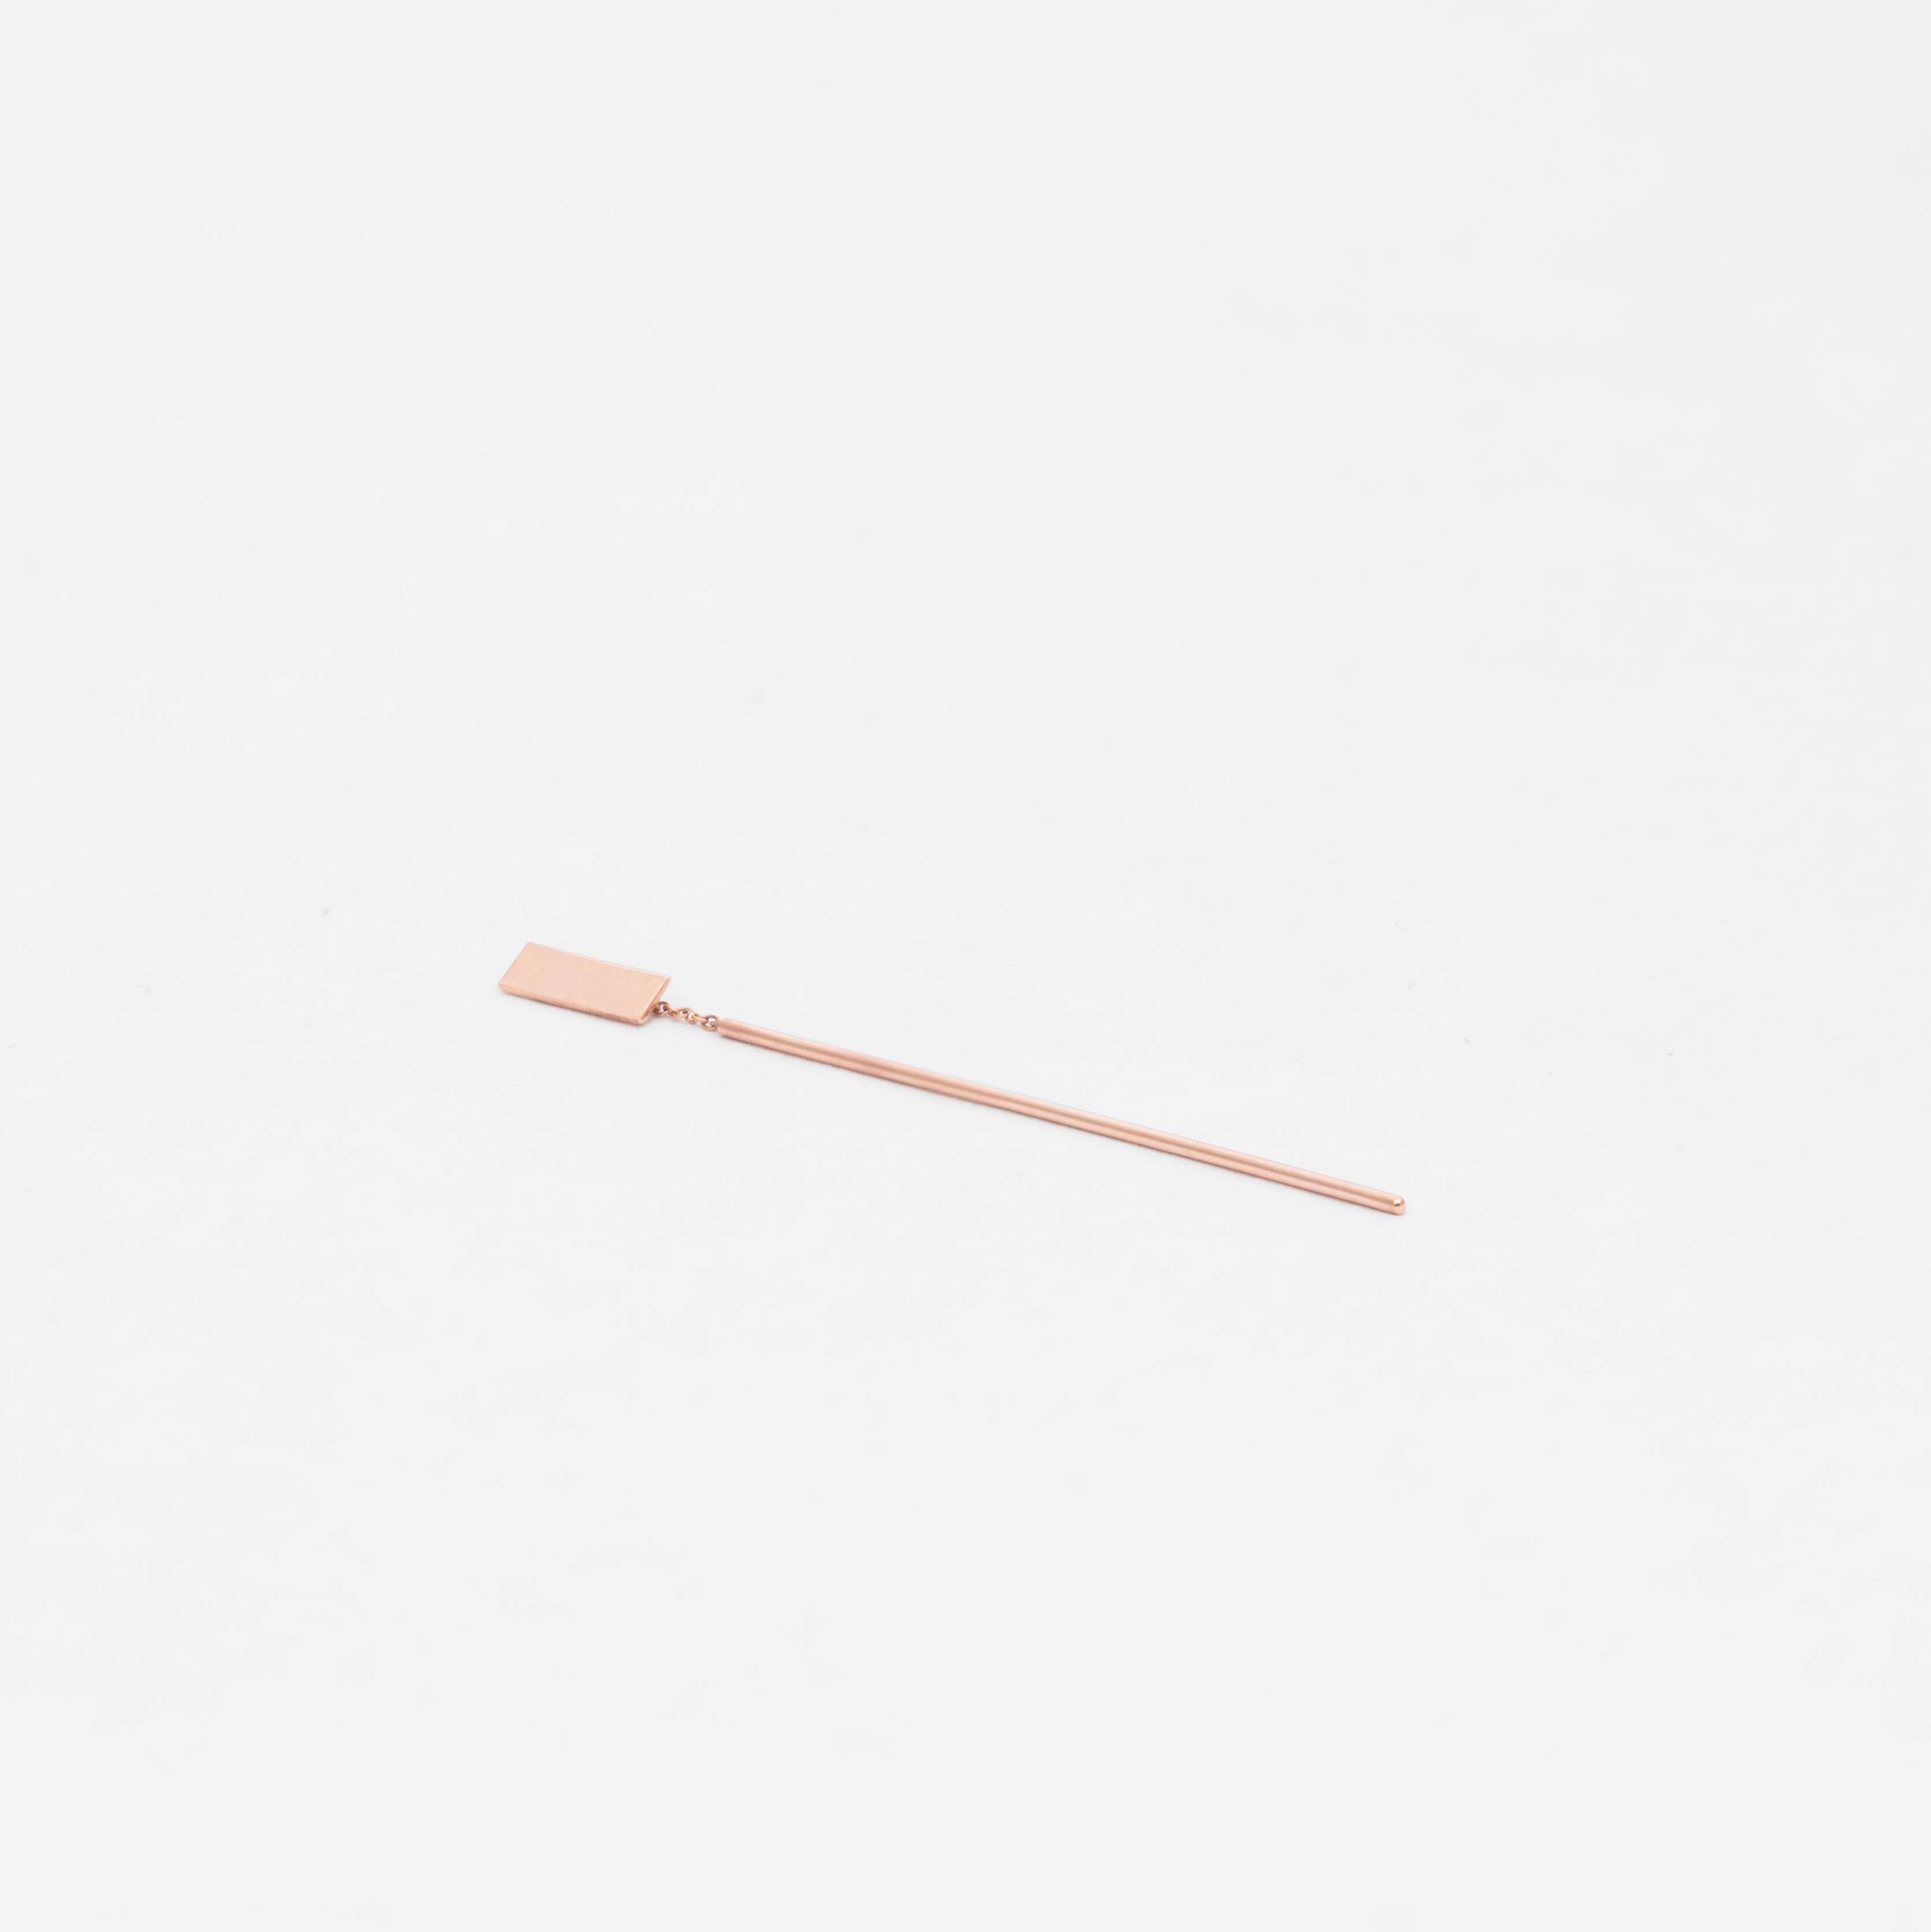 Tili Short Minimalist Pull Through Earring in 14k Rose Gold By SHW Fine Jewelry NYC